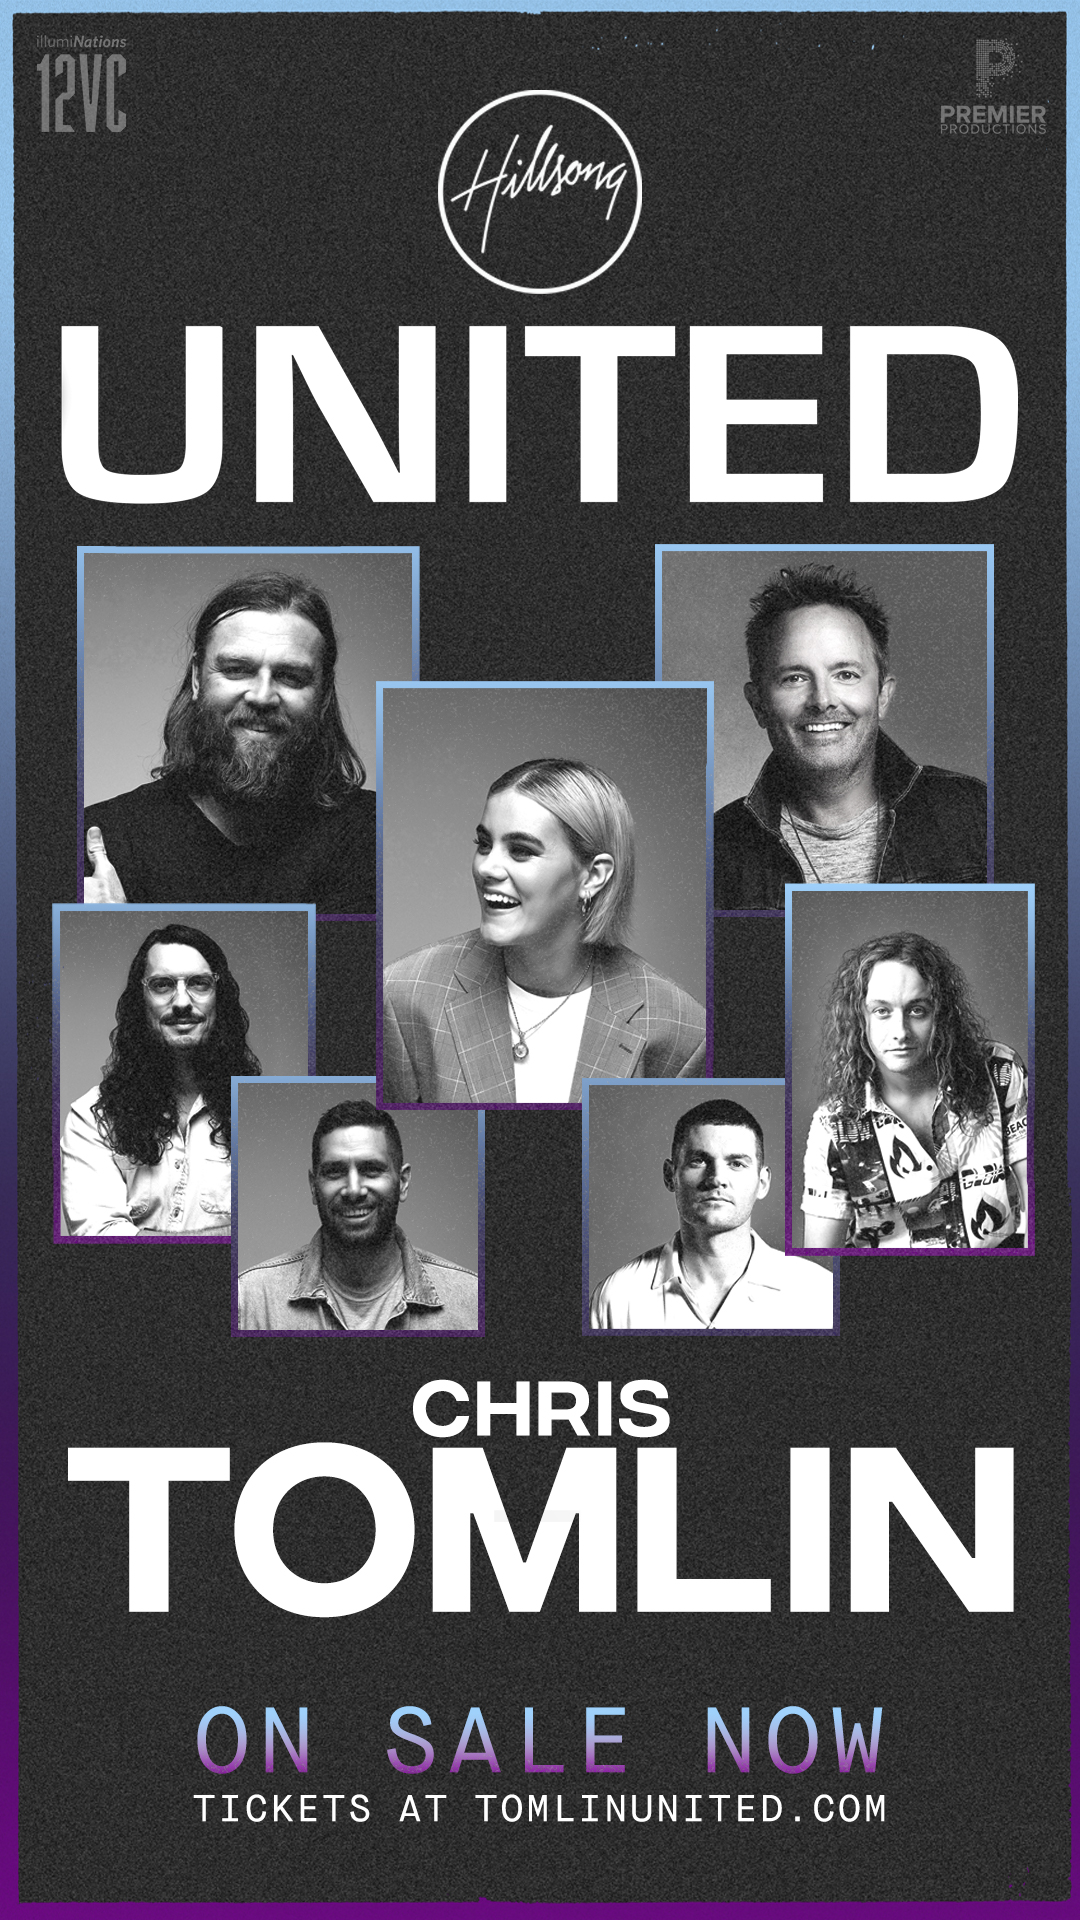 hillsong united tour 2022 cancelled